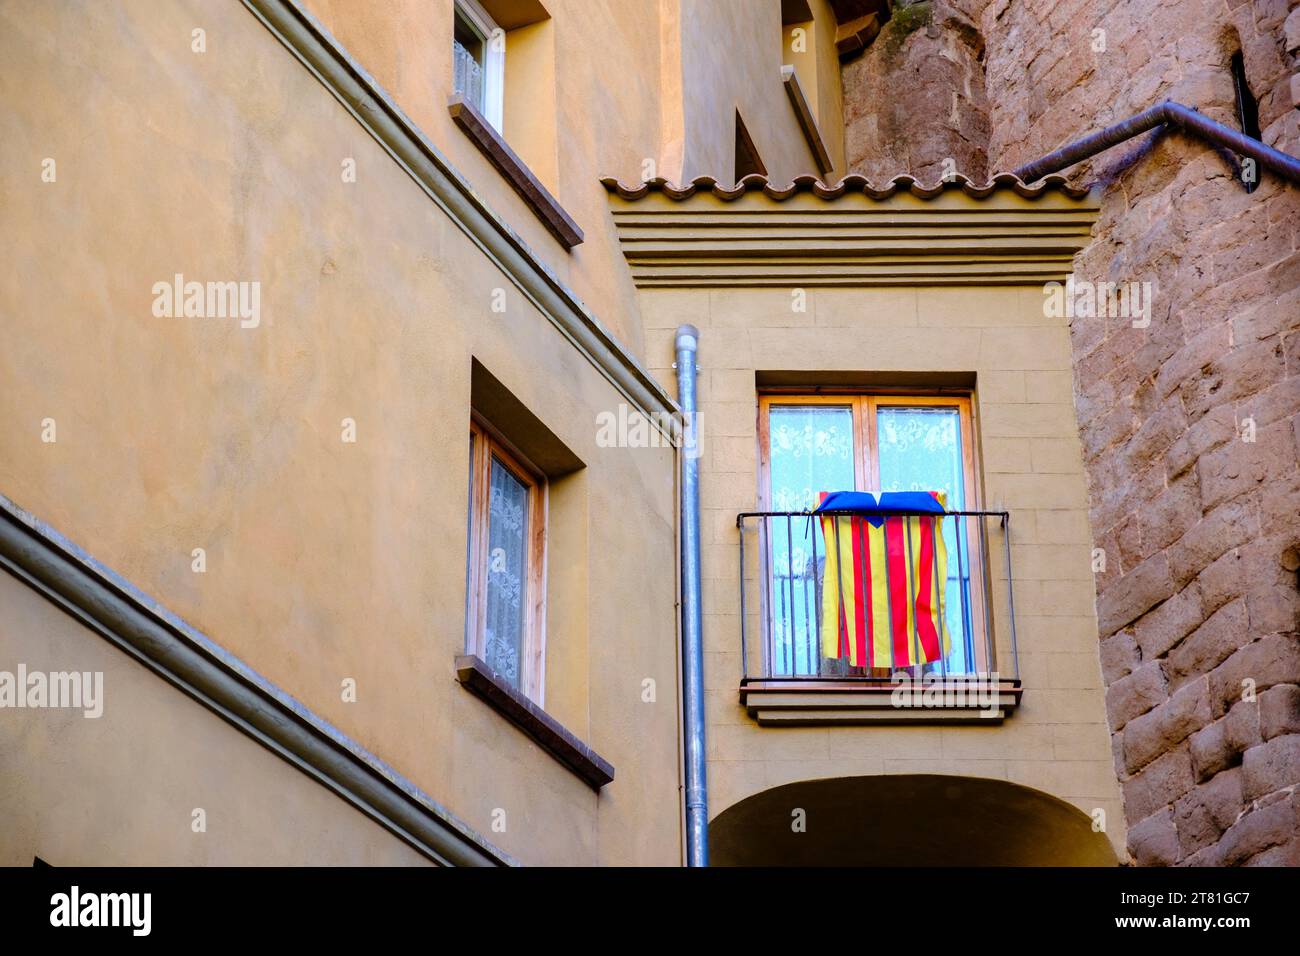 Protest symbol, Catalan Estelada unofficial star flag hanging from a balcony in the city of Cardona, Catalonia, Spain Stock Photo